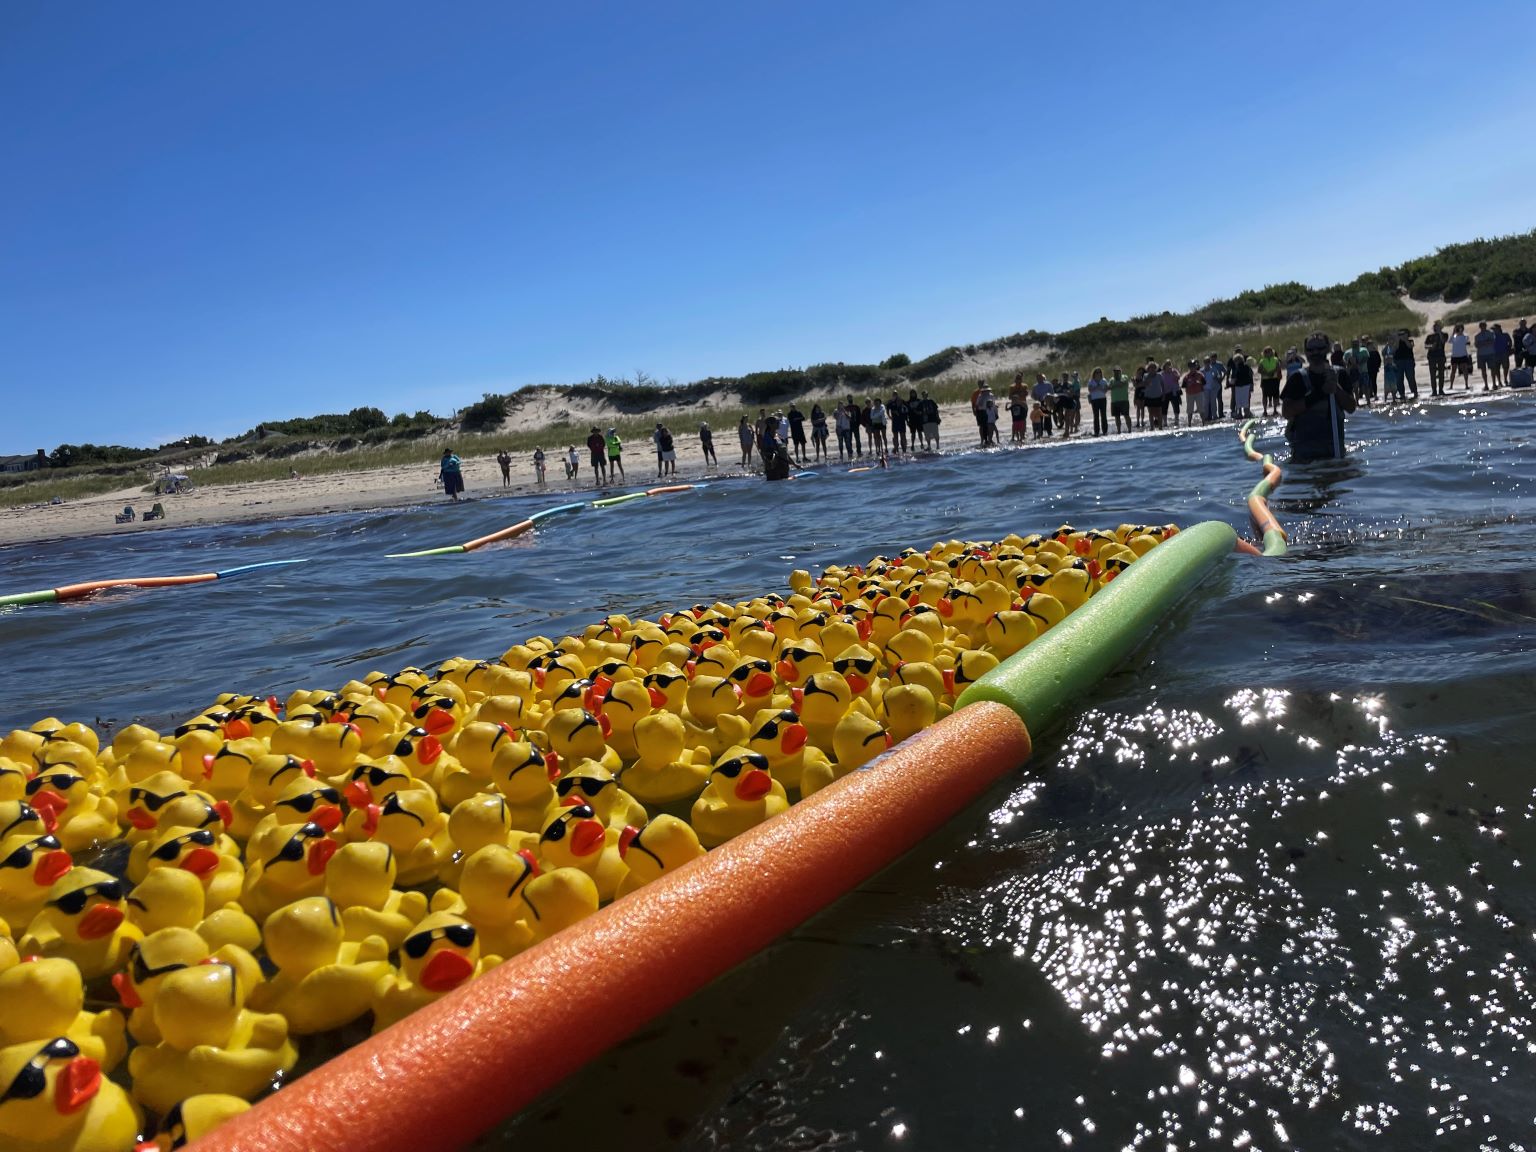 Ducks racing in the water at Corporation Beach